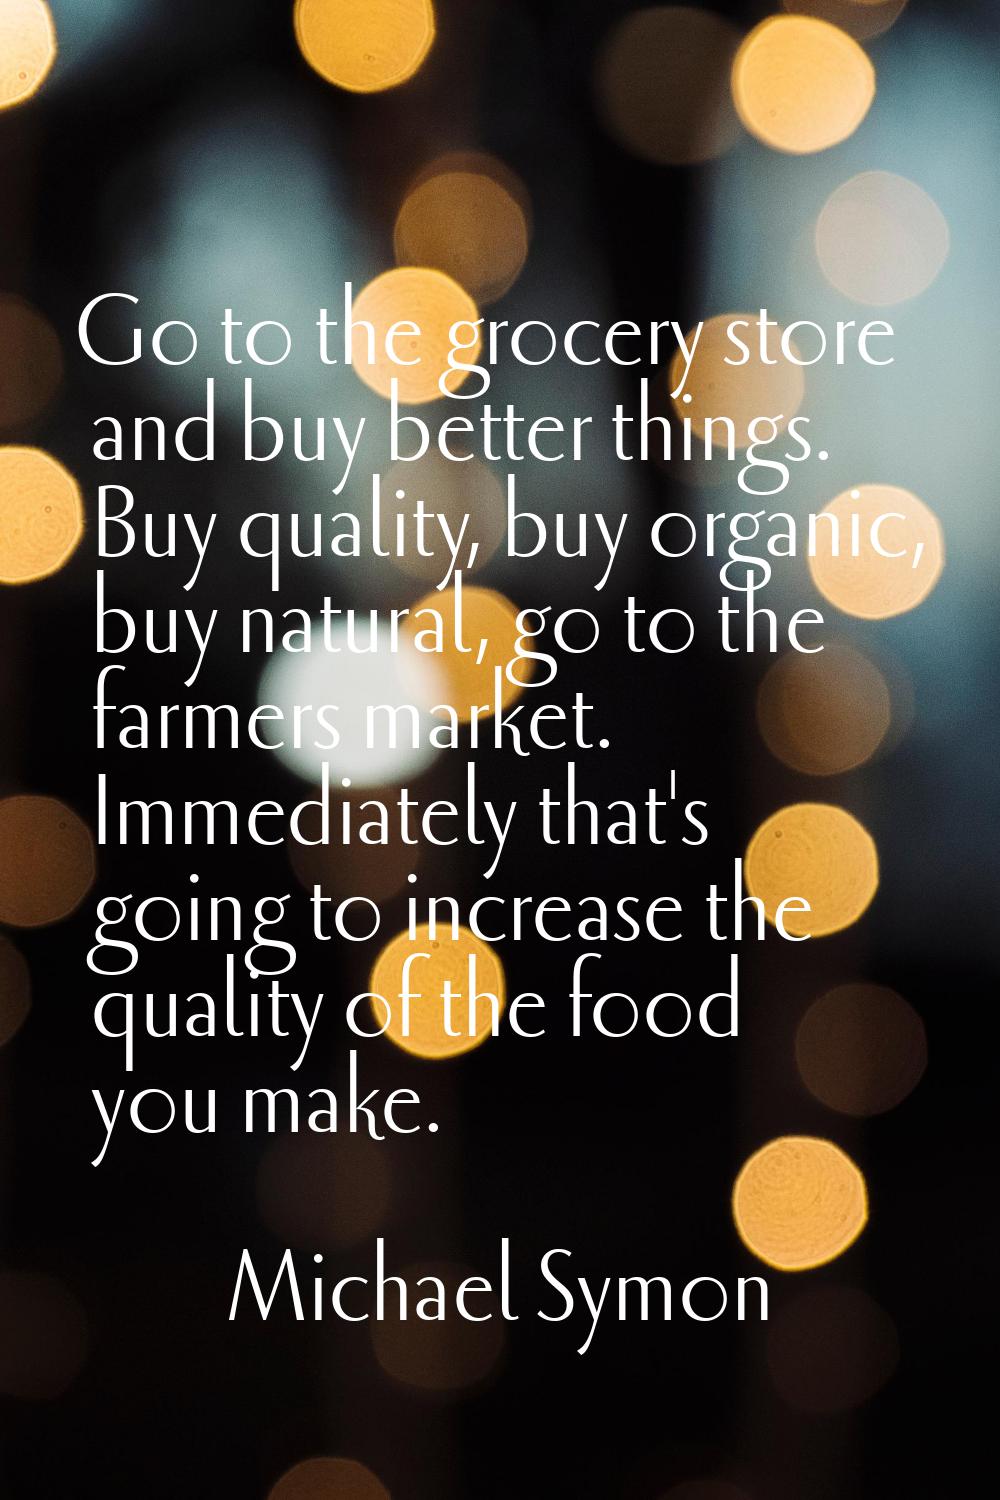 Go to the grocery store and buy better things. Buy quality, buy organic, buy natural, go to the far